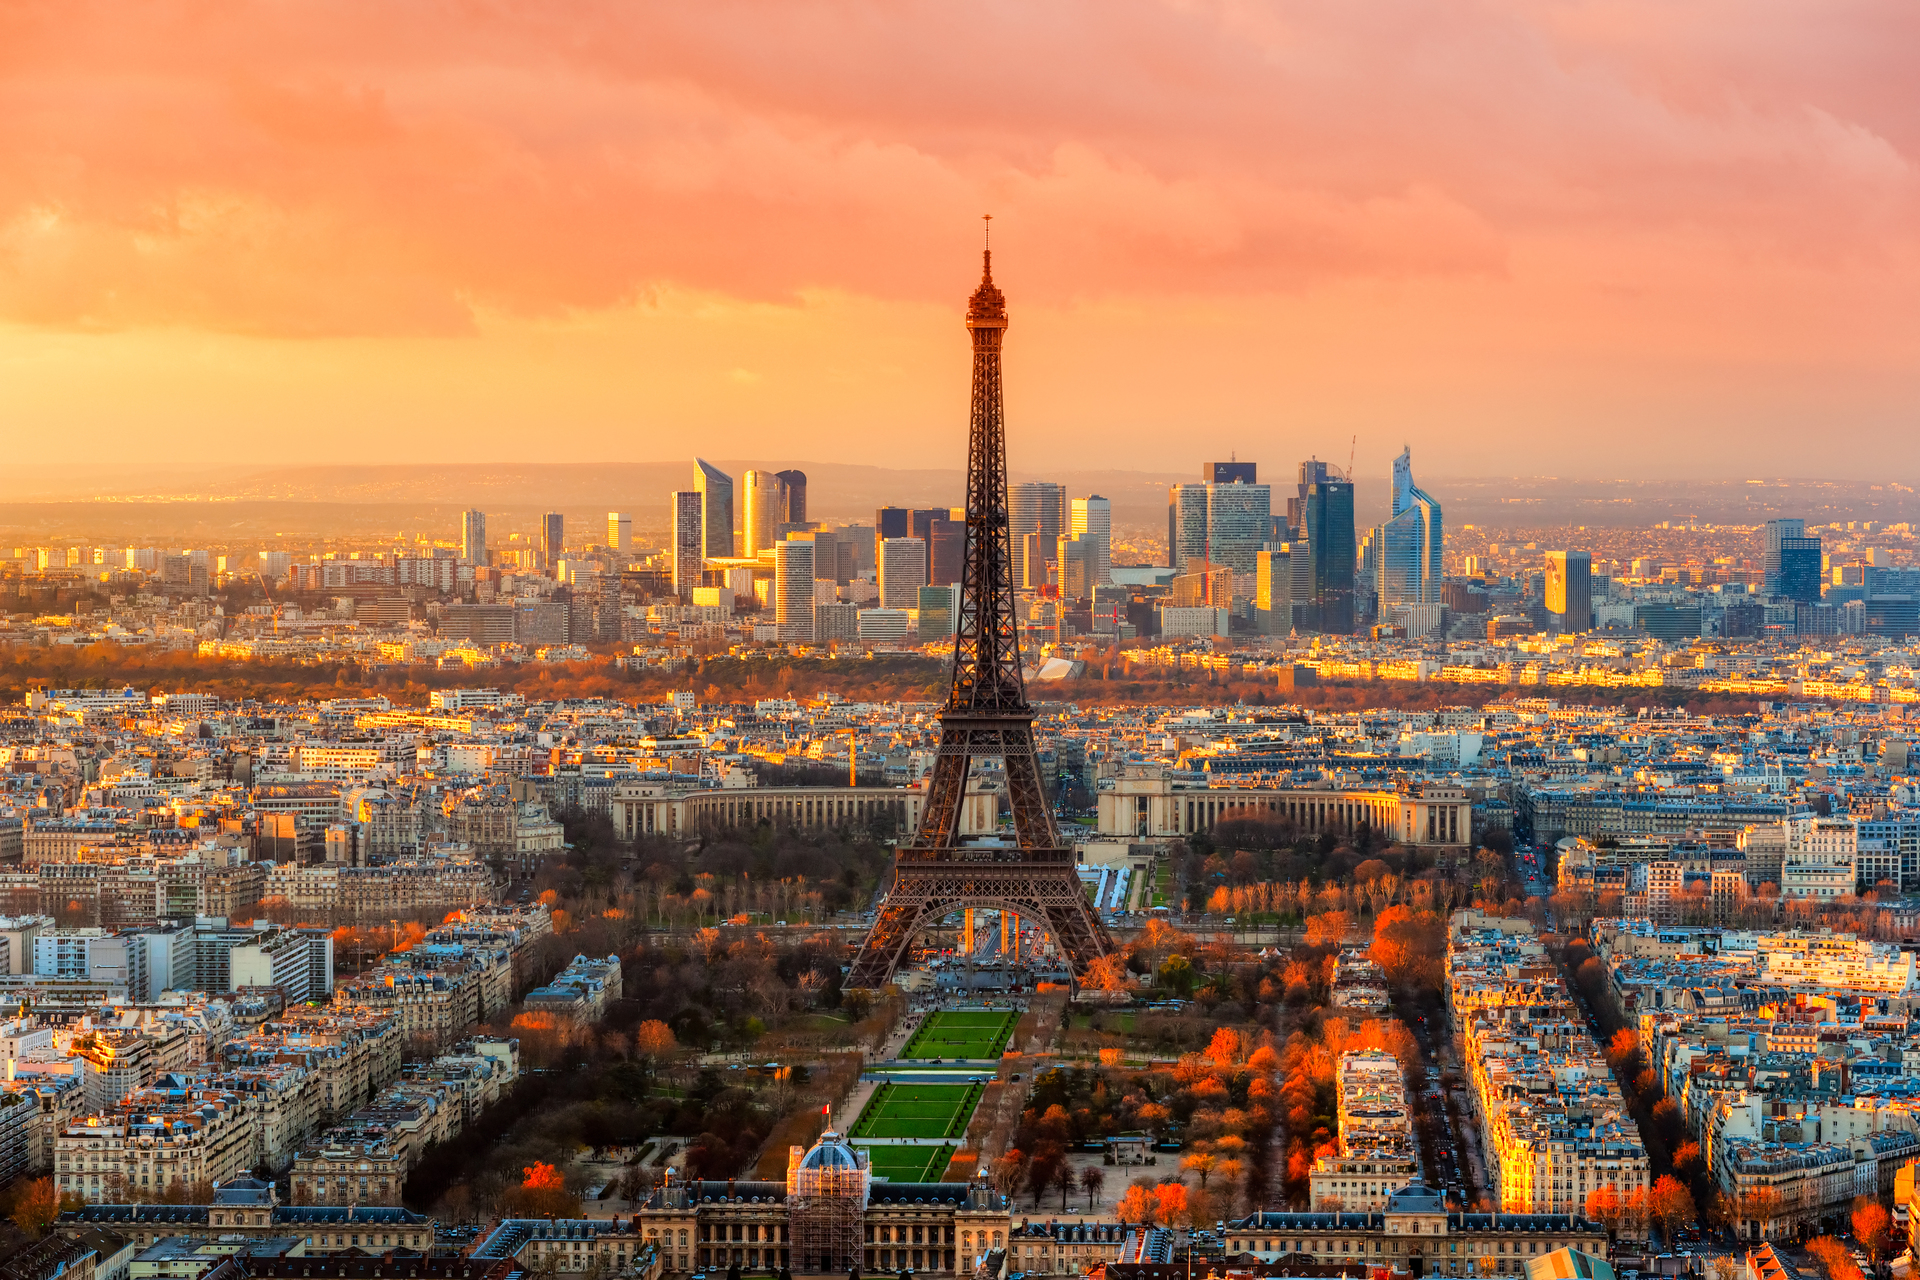 Tourists Want To Experience 'Emily in Paris' for Real – Blog